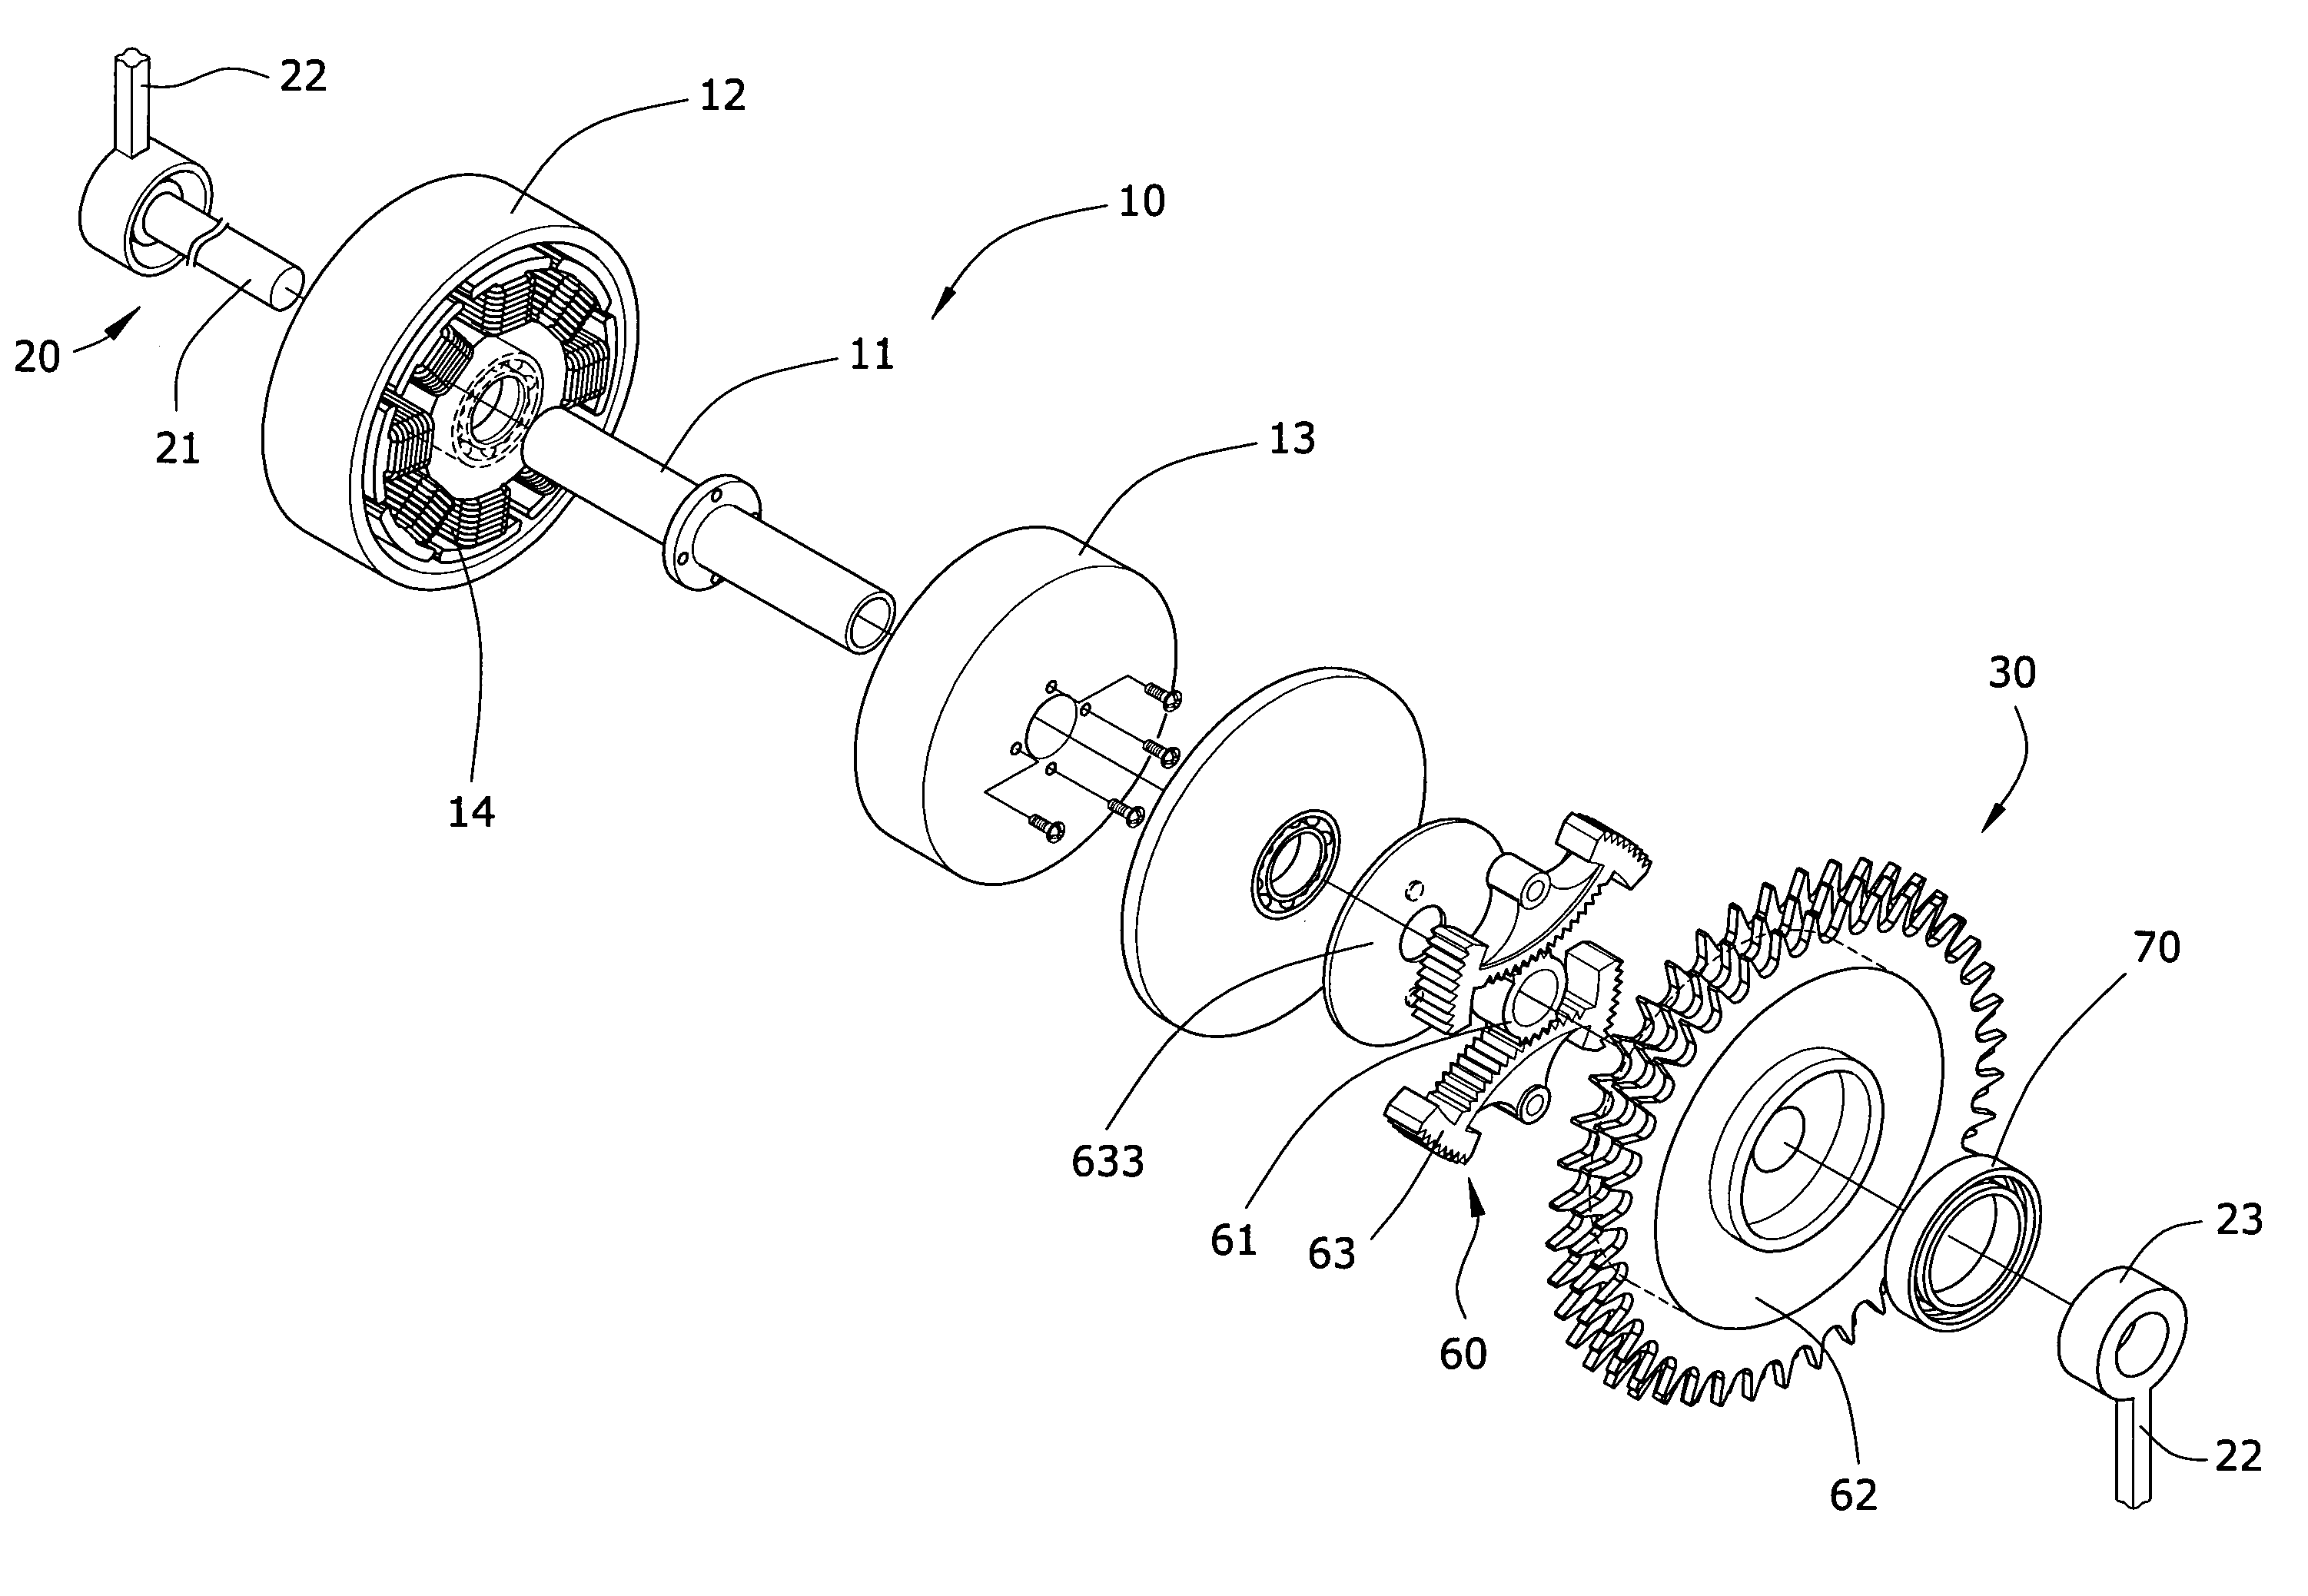 Transmission structure for an electrically operated bicycle